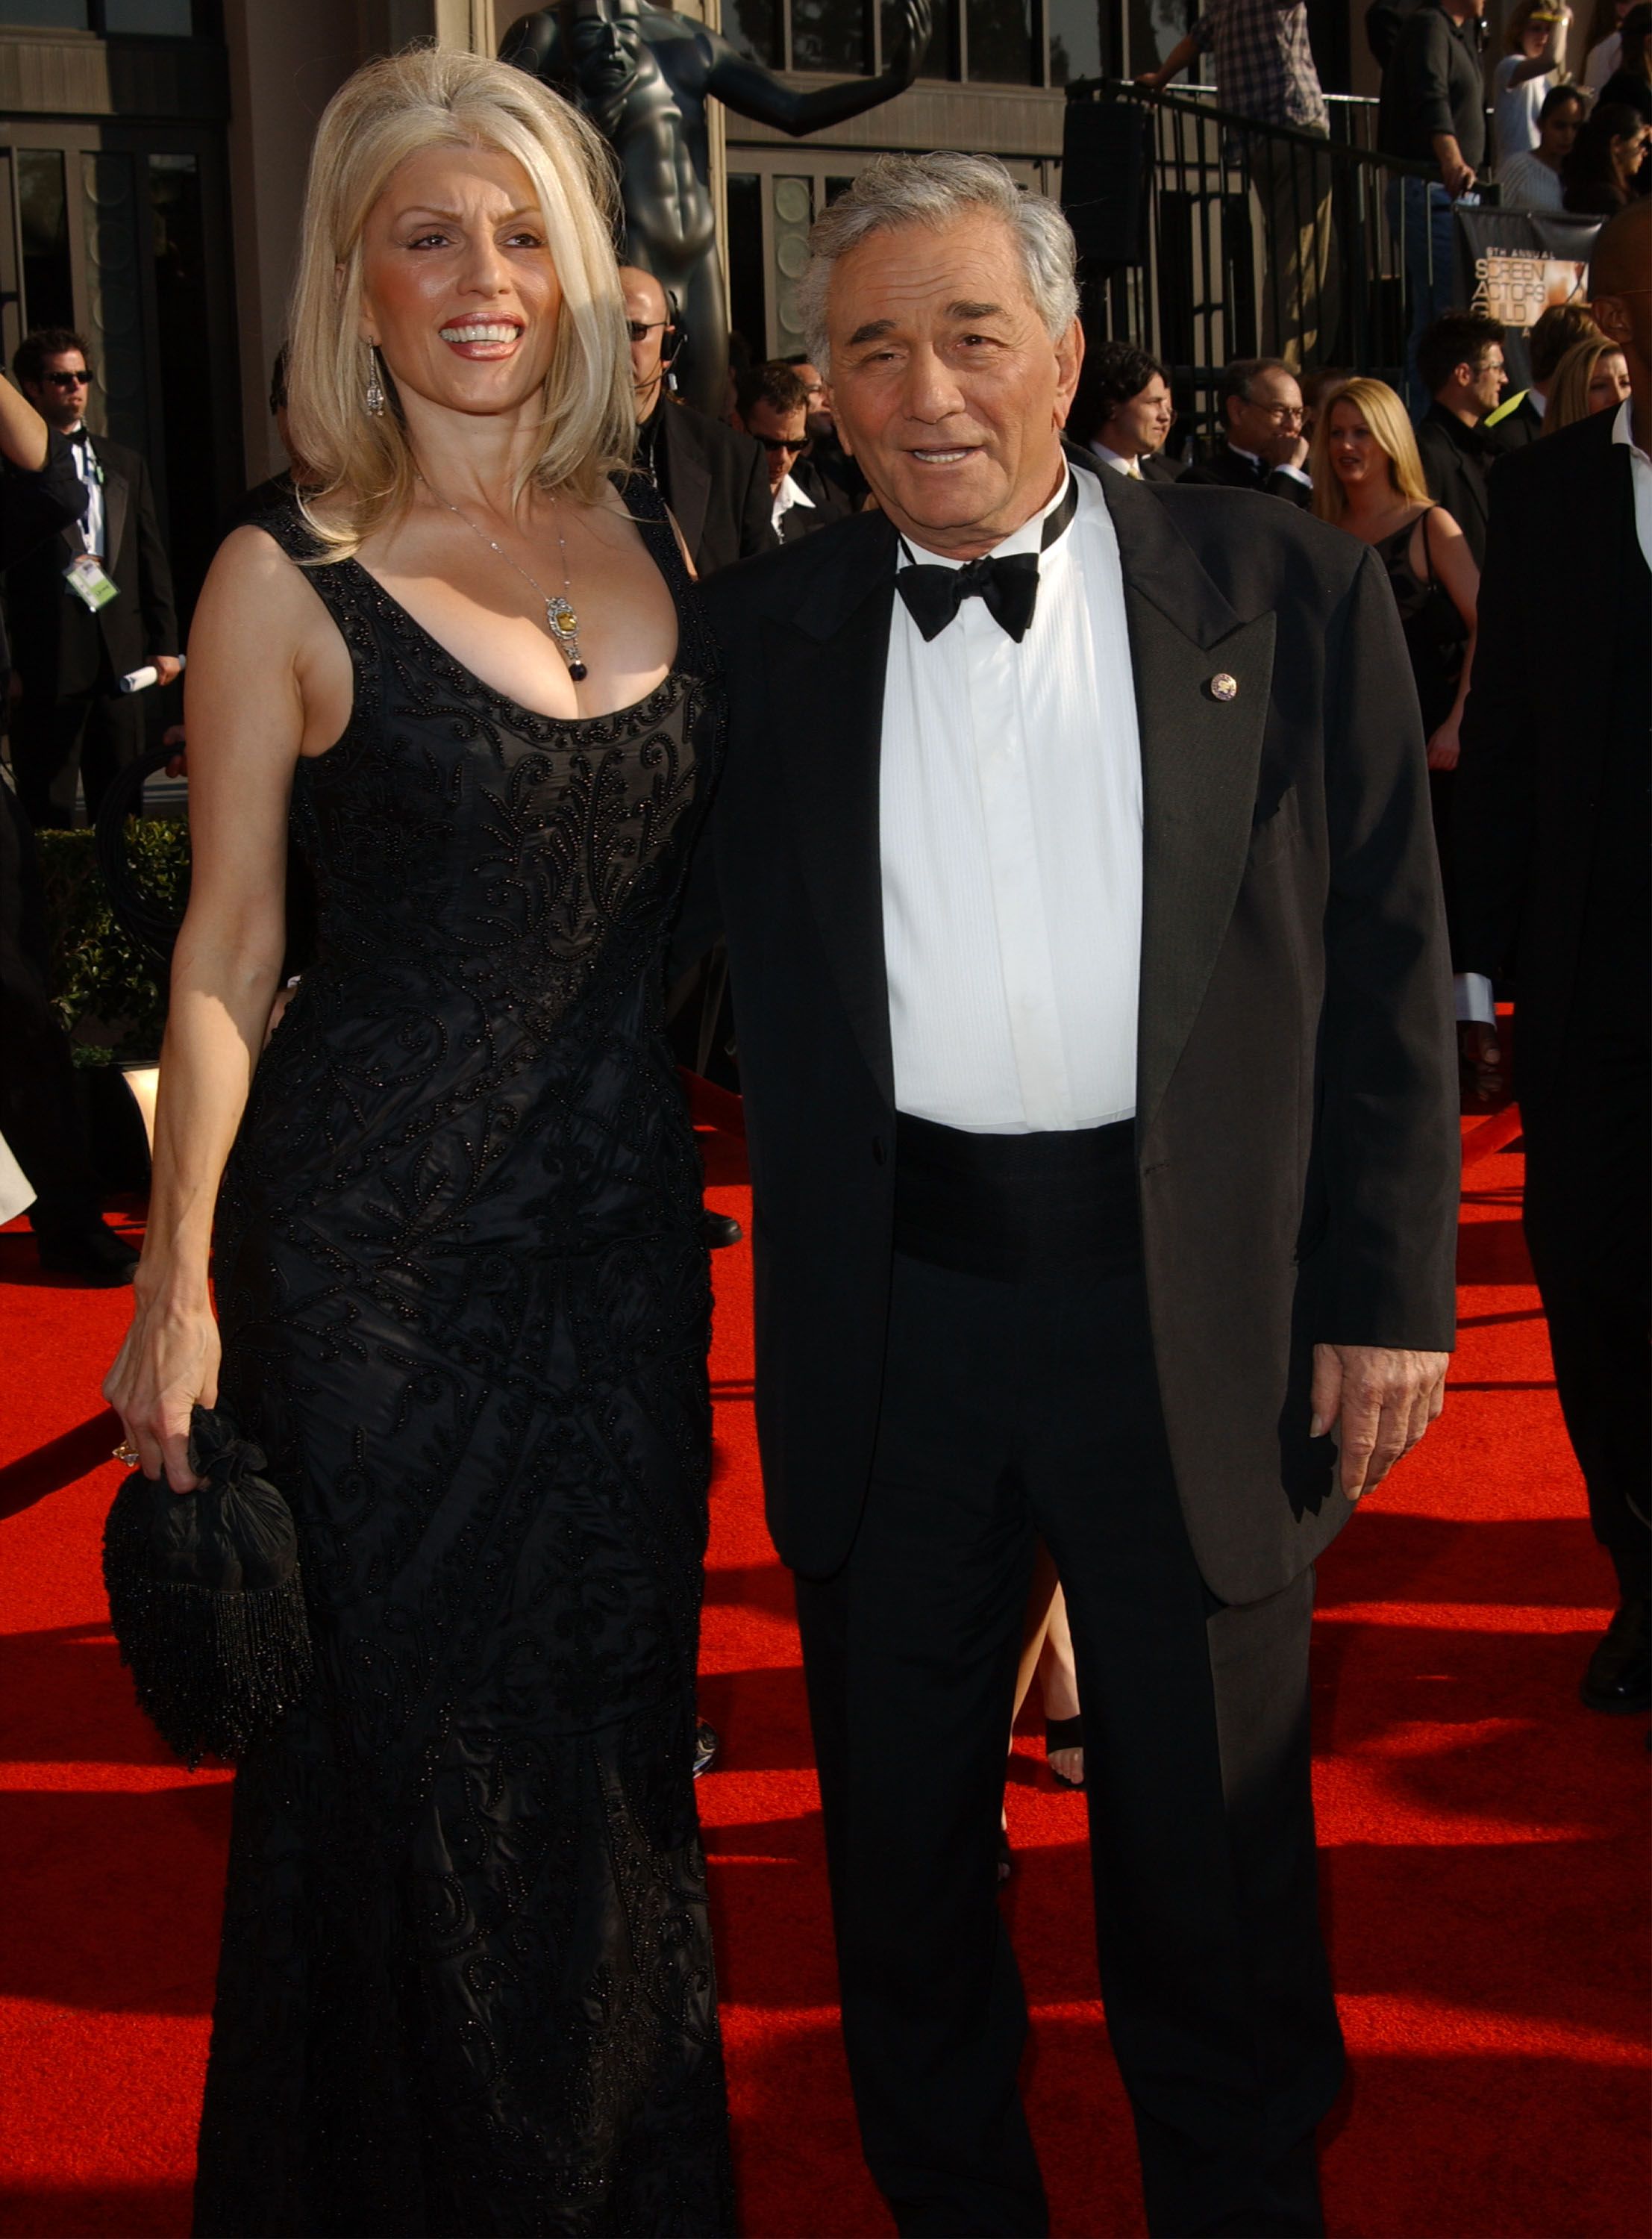 Peter Falk and Shera Danese during the 2003 Screen Actors Guild Awards. | Photo: Getty Images